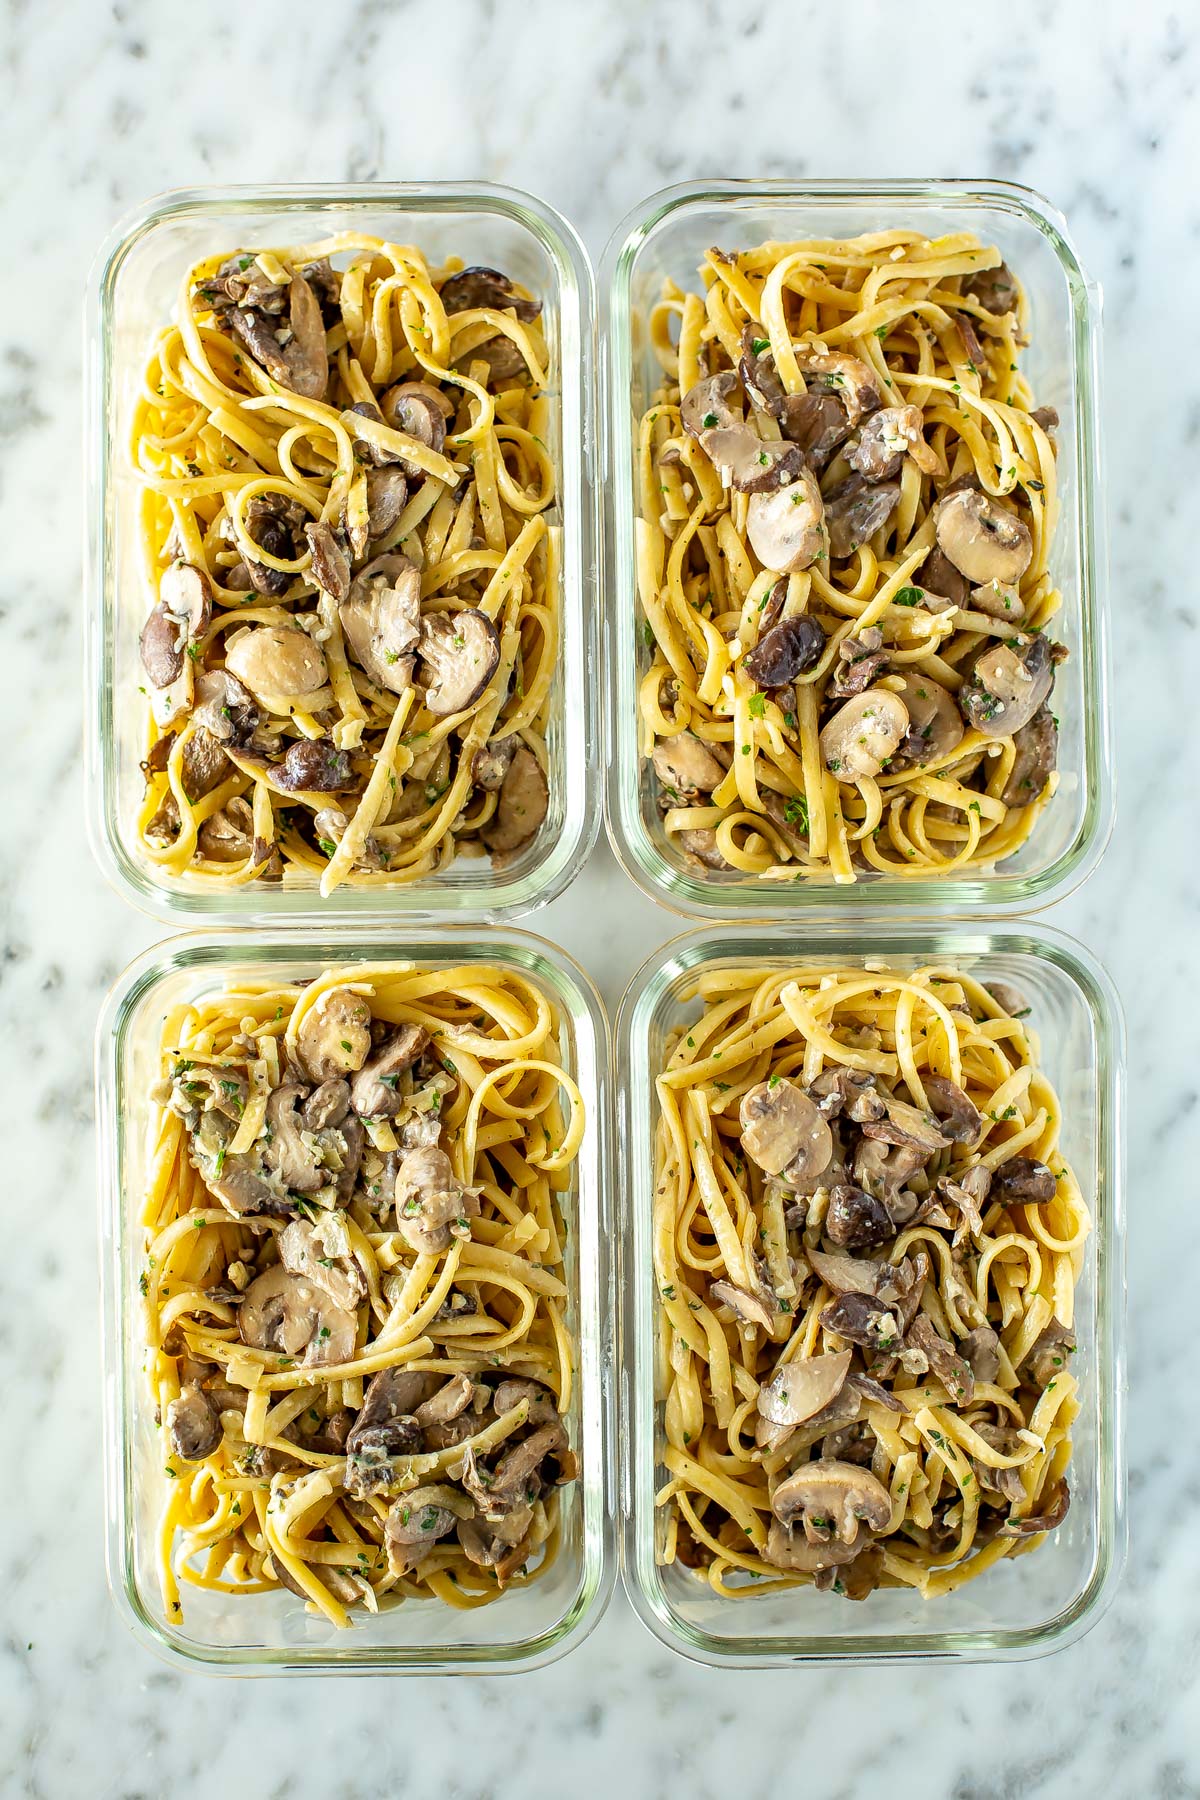 Four meal prep containers, each filled with creamy mushroom pasta.